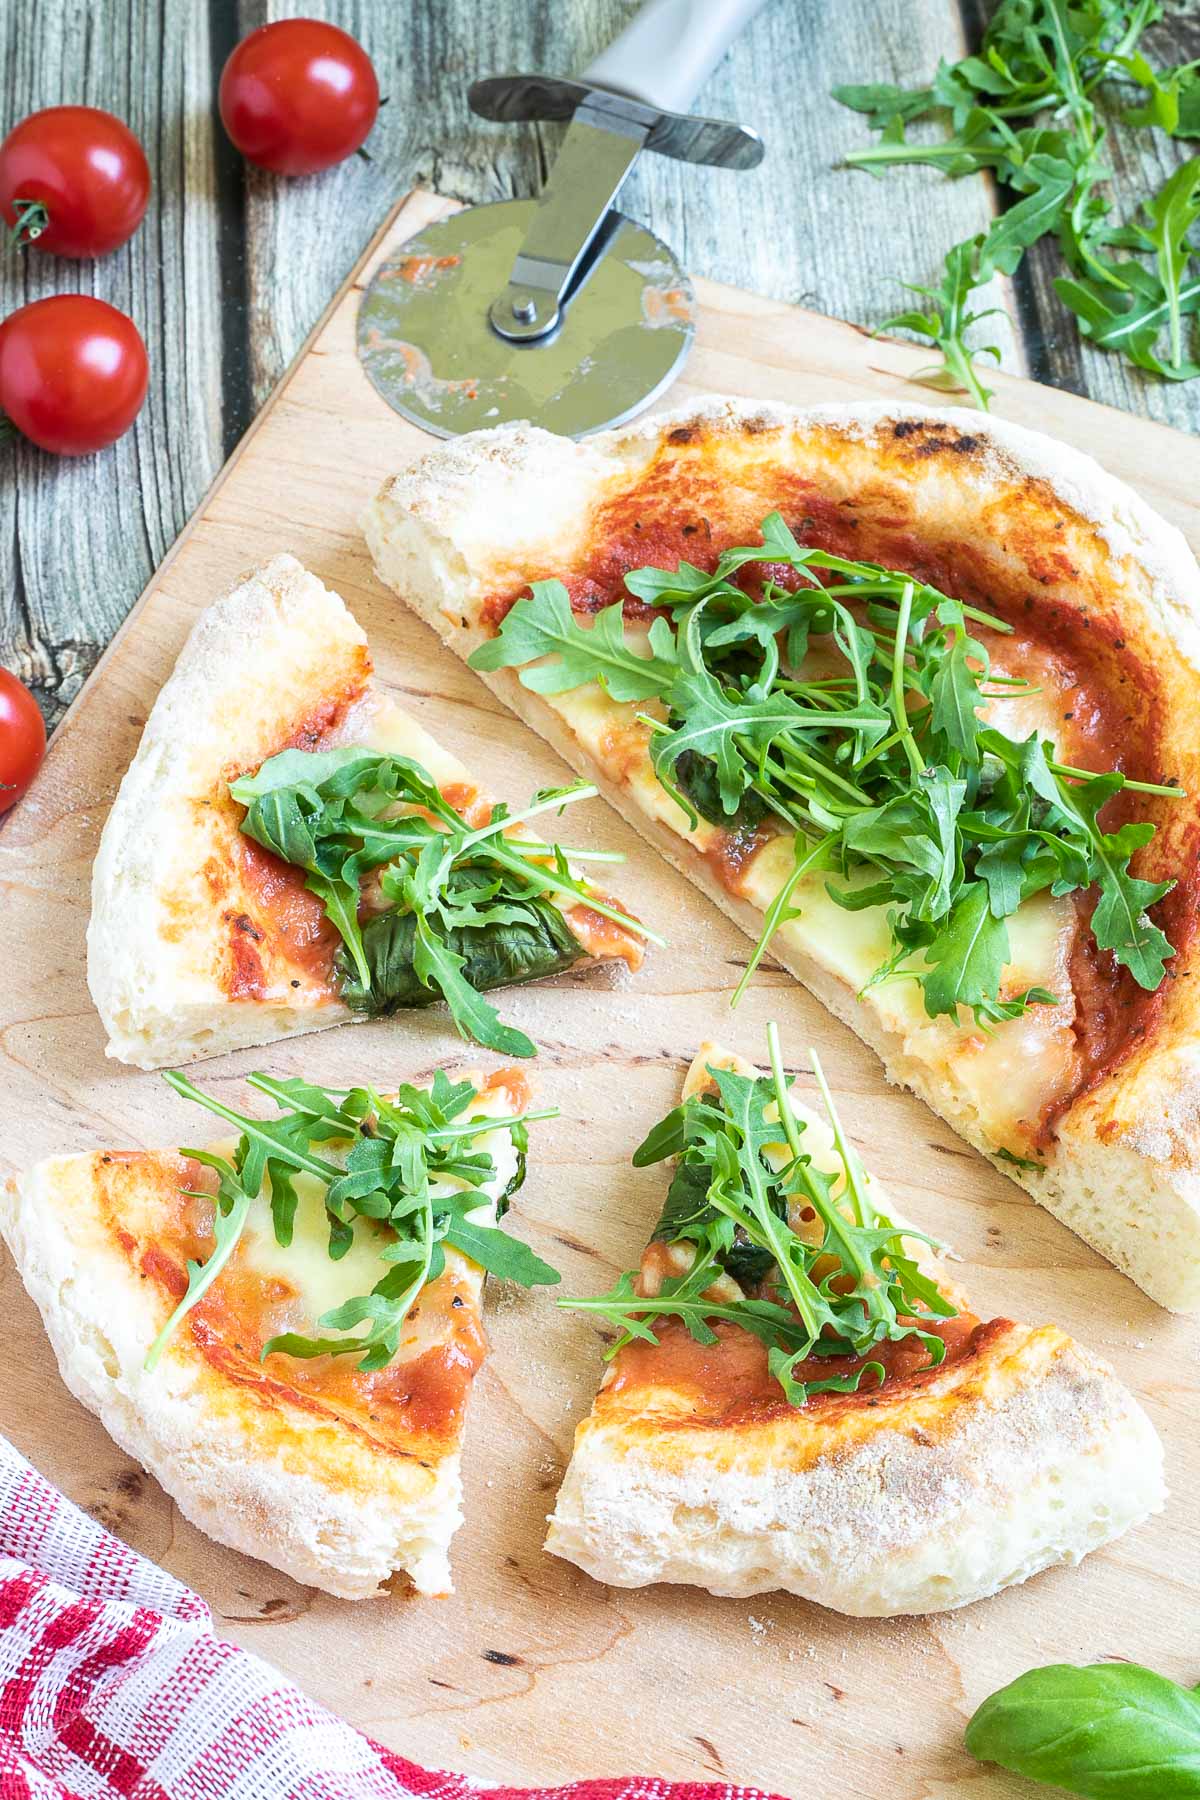 A pizza cut into slices with fluffy crispy crust topped with tomato sauce, melted cheese and fresh arugula on a wooden board. Pizza cutter and more fresh herbs ingredients are around it.